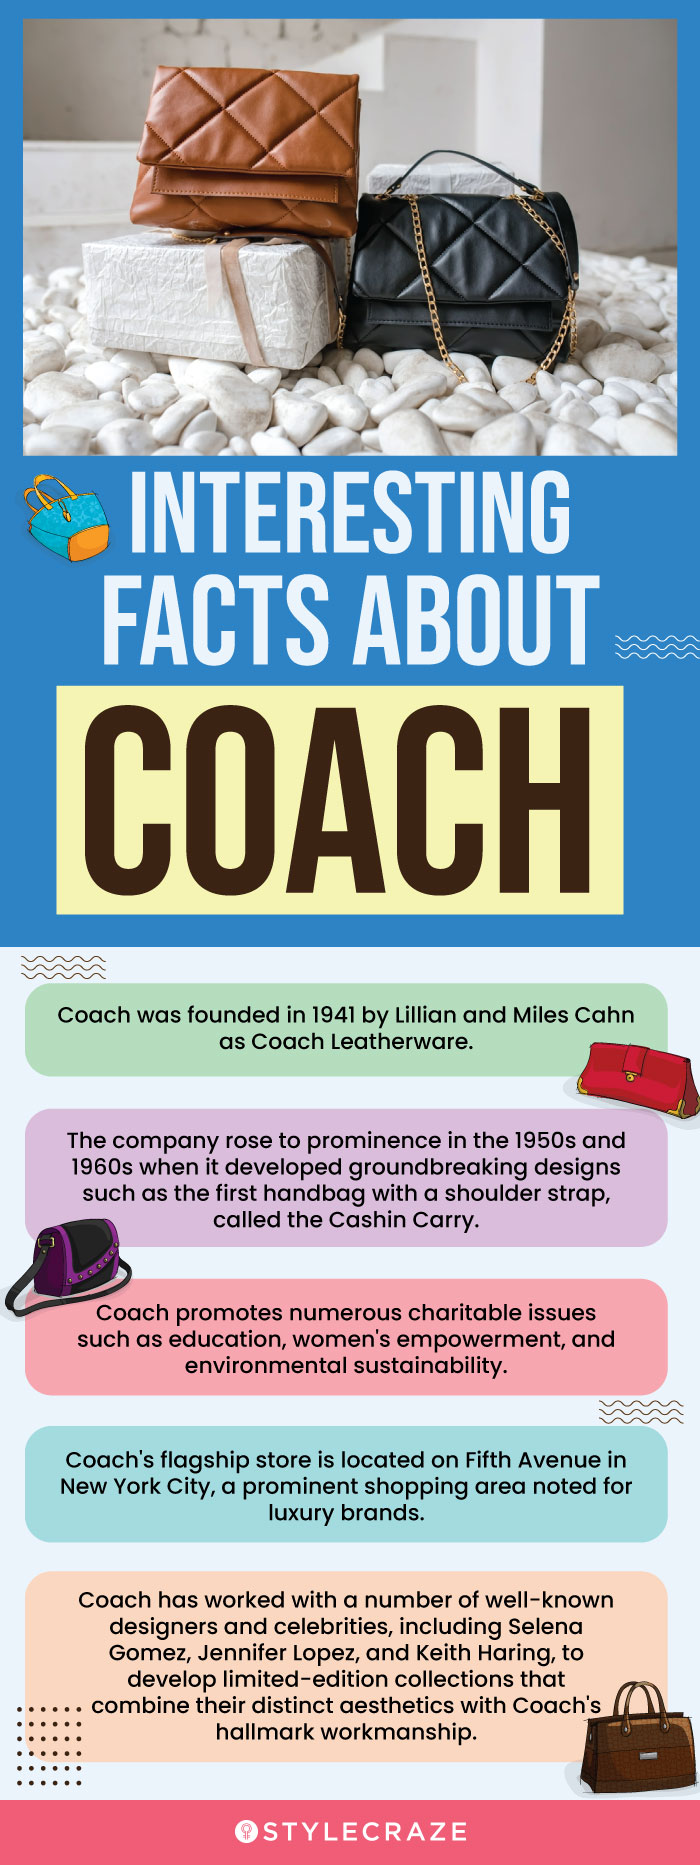 Interesting Facts About Coach (infographic)